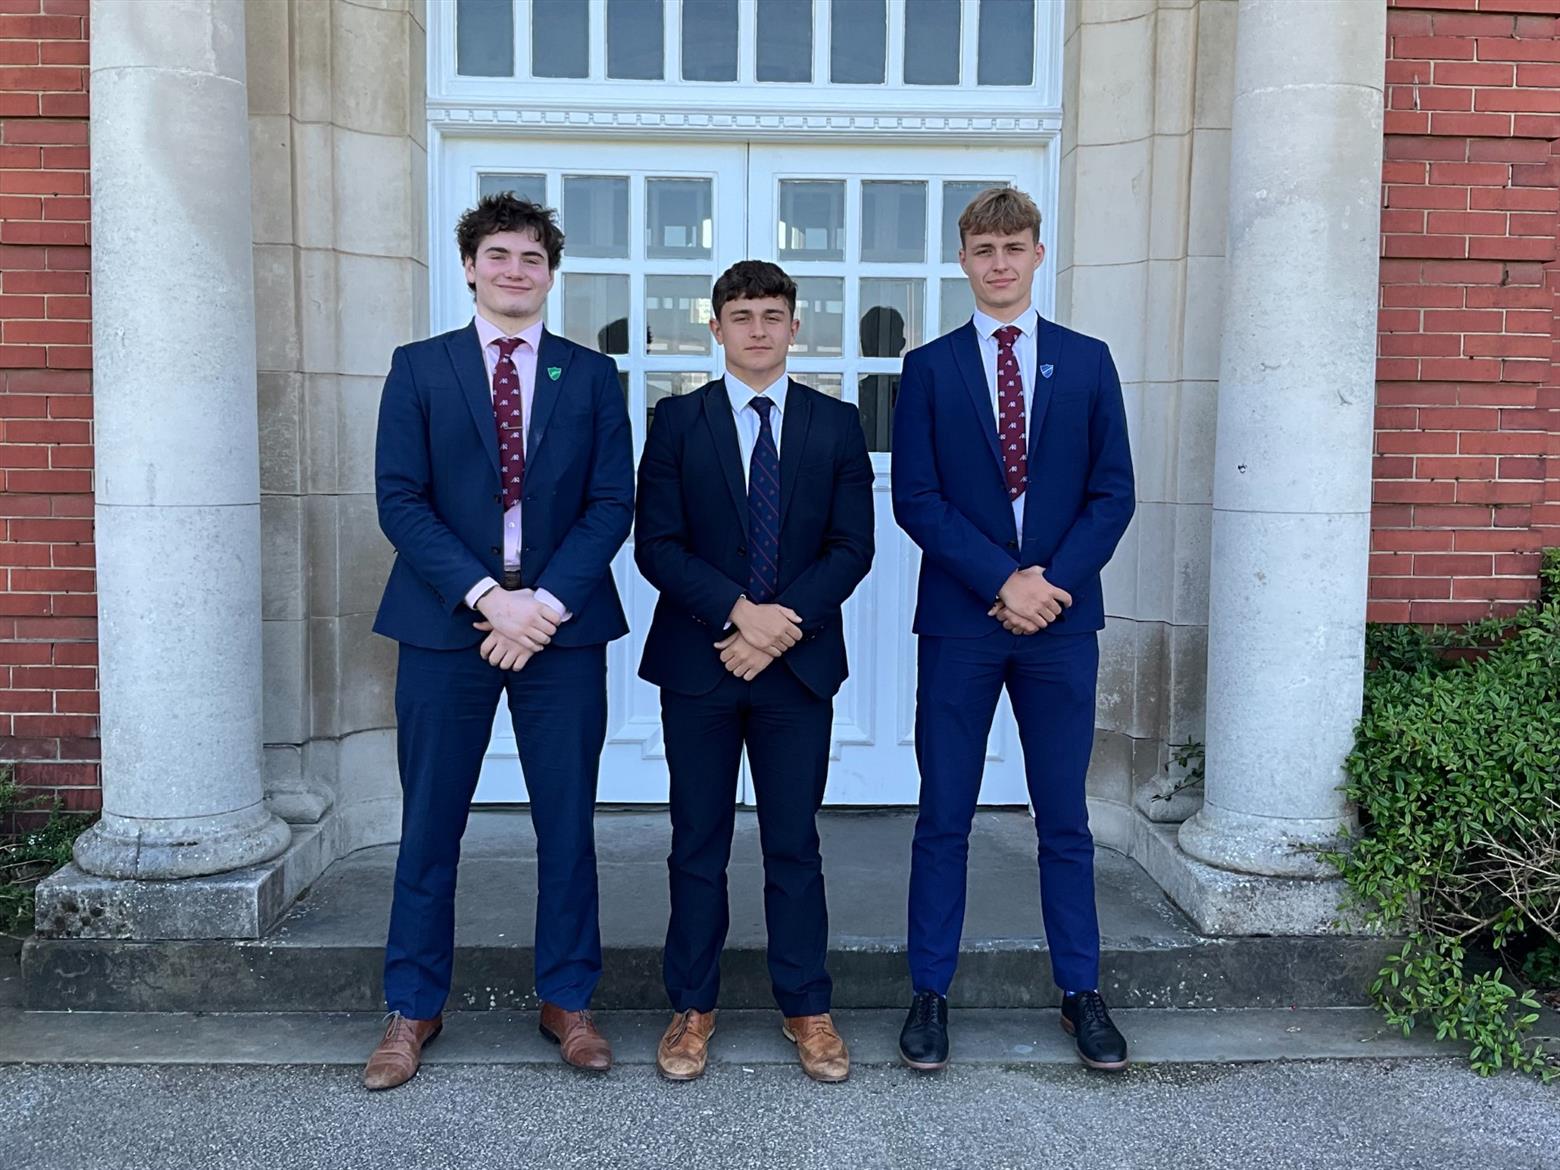 Three AKS players selected for Lancashire U17 XV rugby